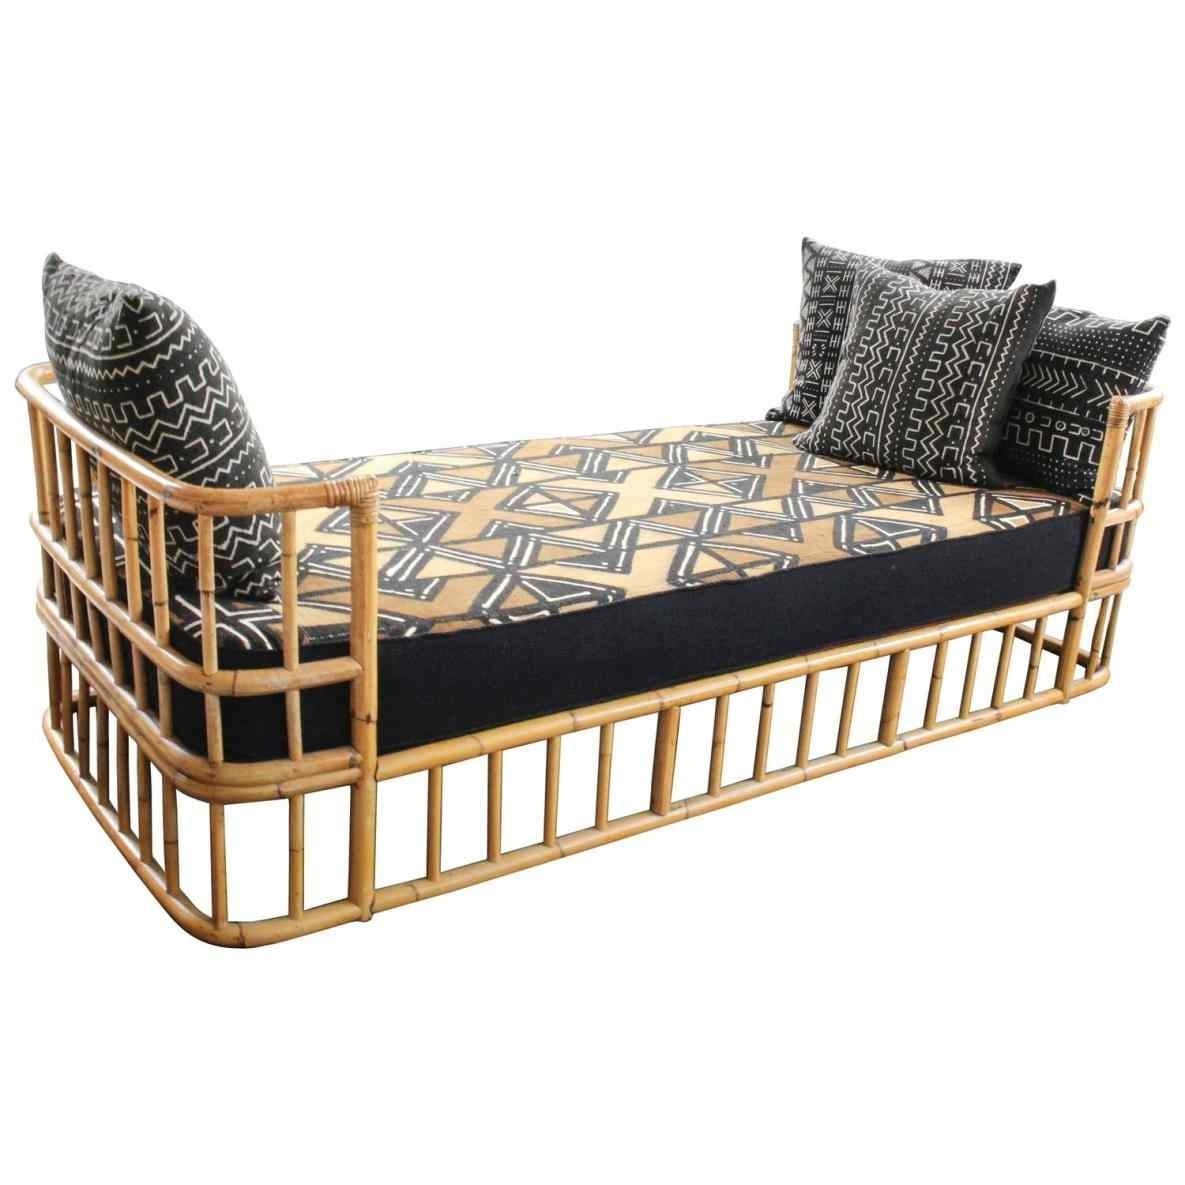 Vintage rattan daybed sofa cope